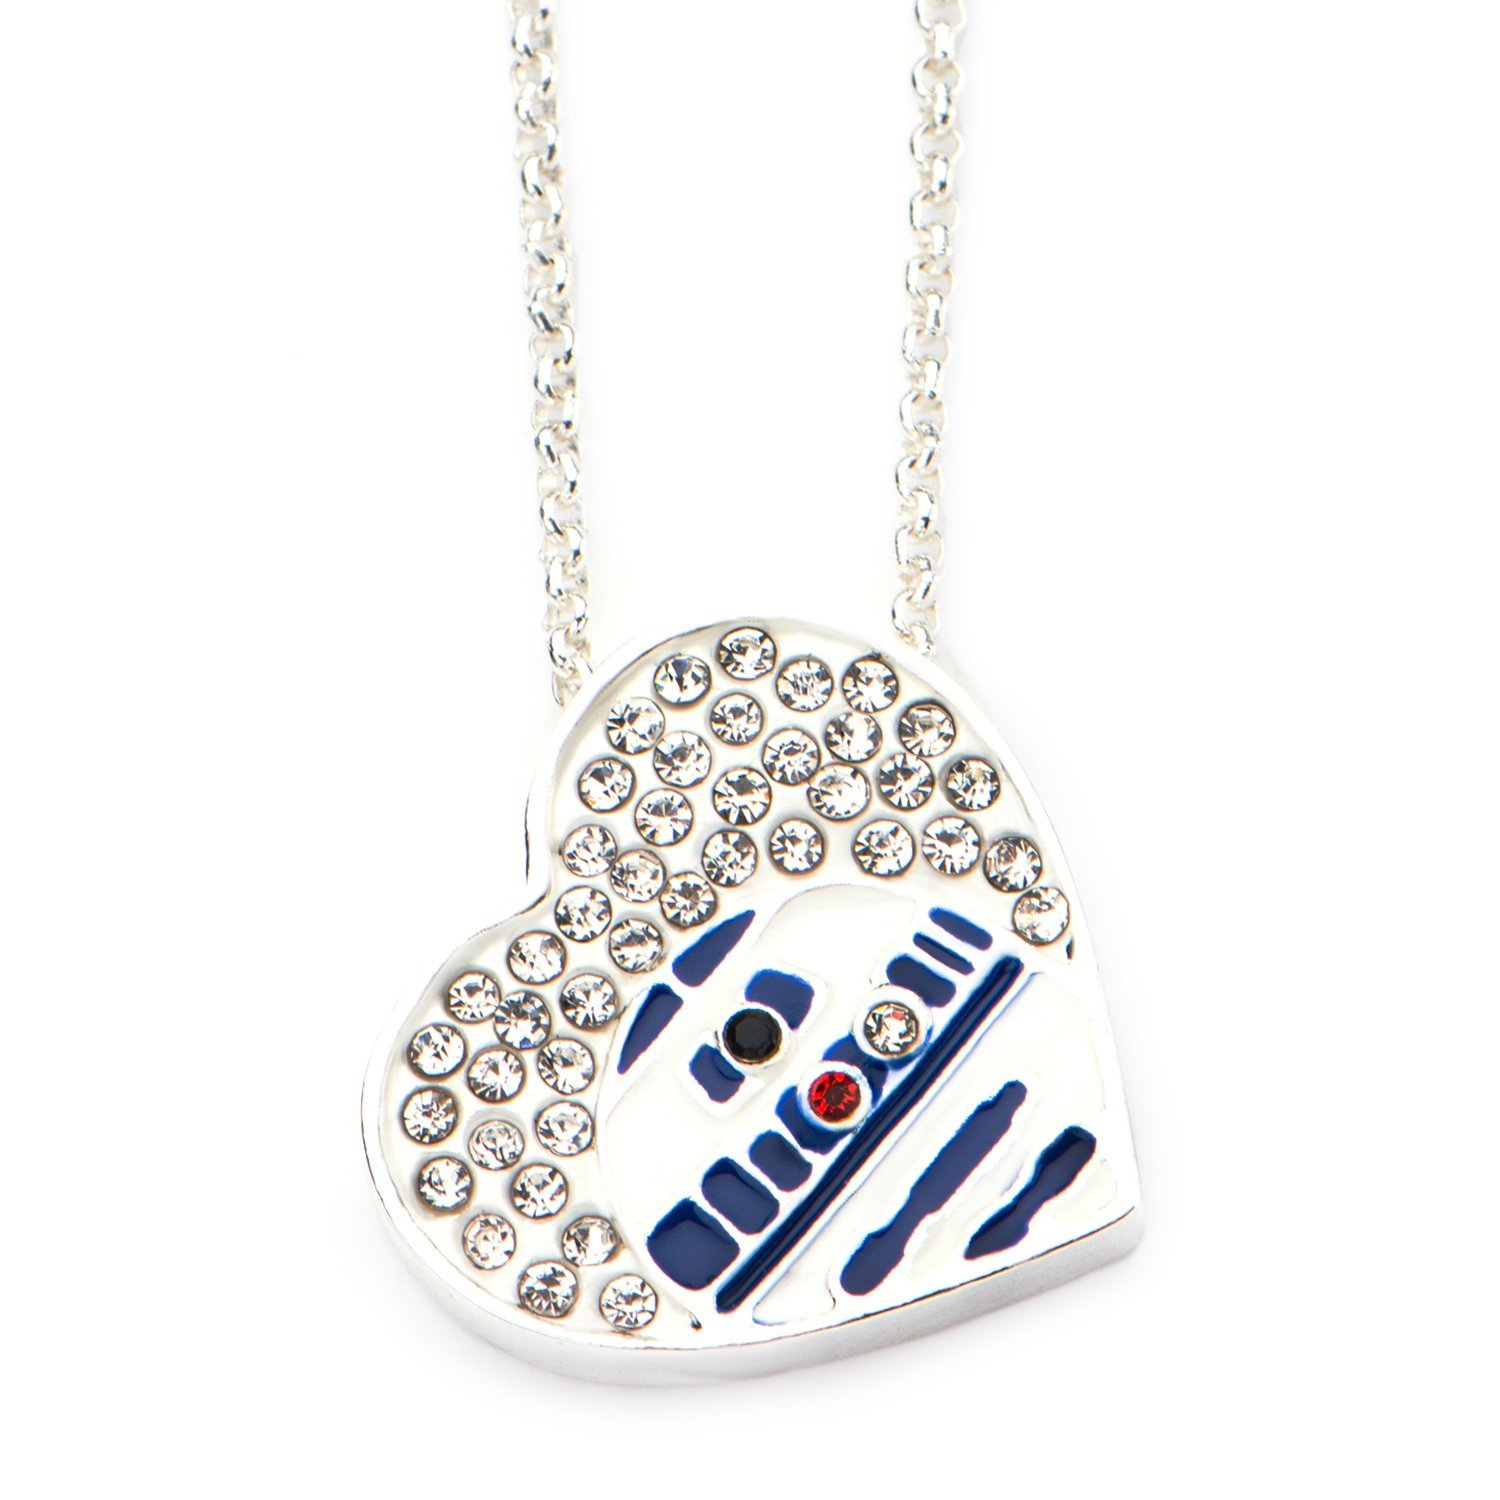 Star Wars R2-D2 heart shaped crystal necklace at Amazon